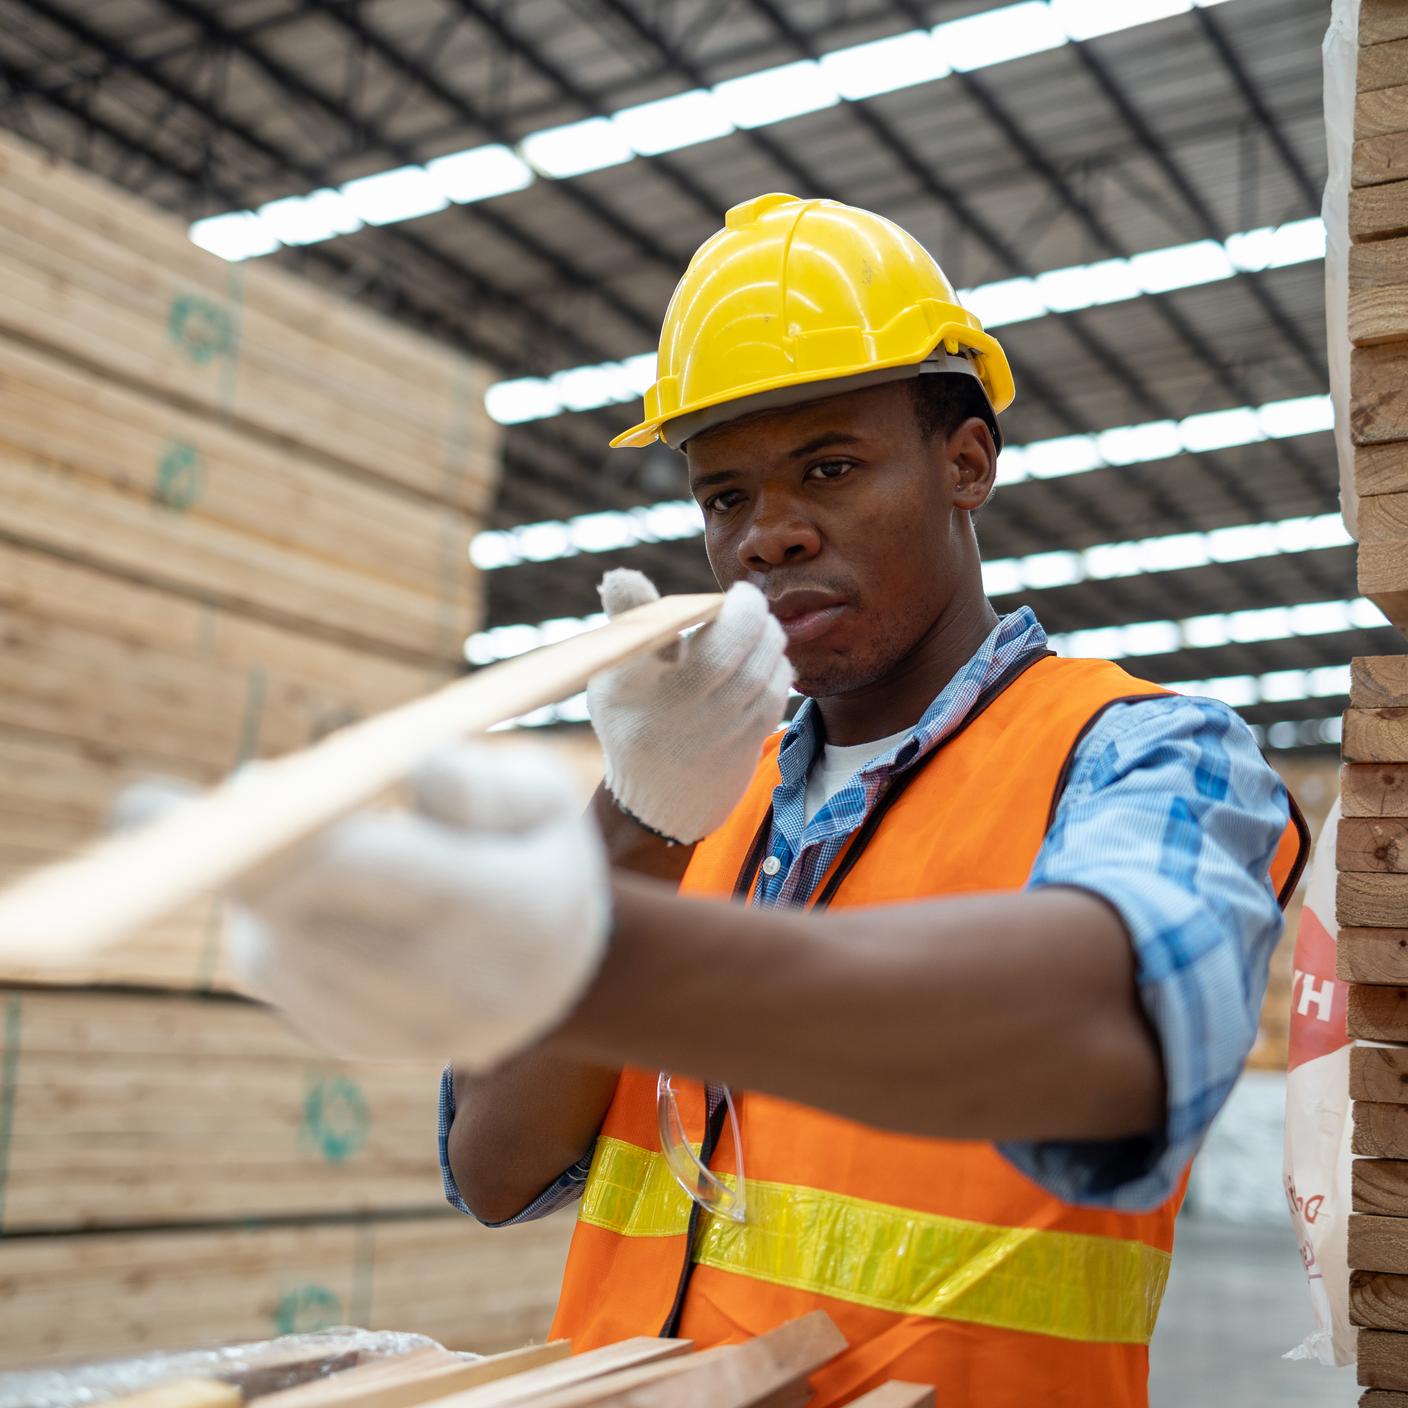 Standards that strengthen international trade - Worker in a safety vest and helmet